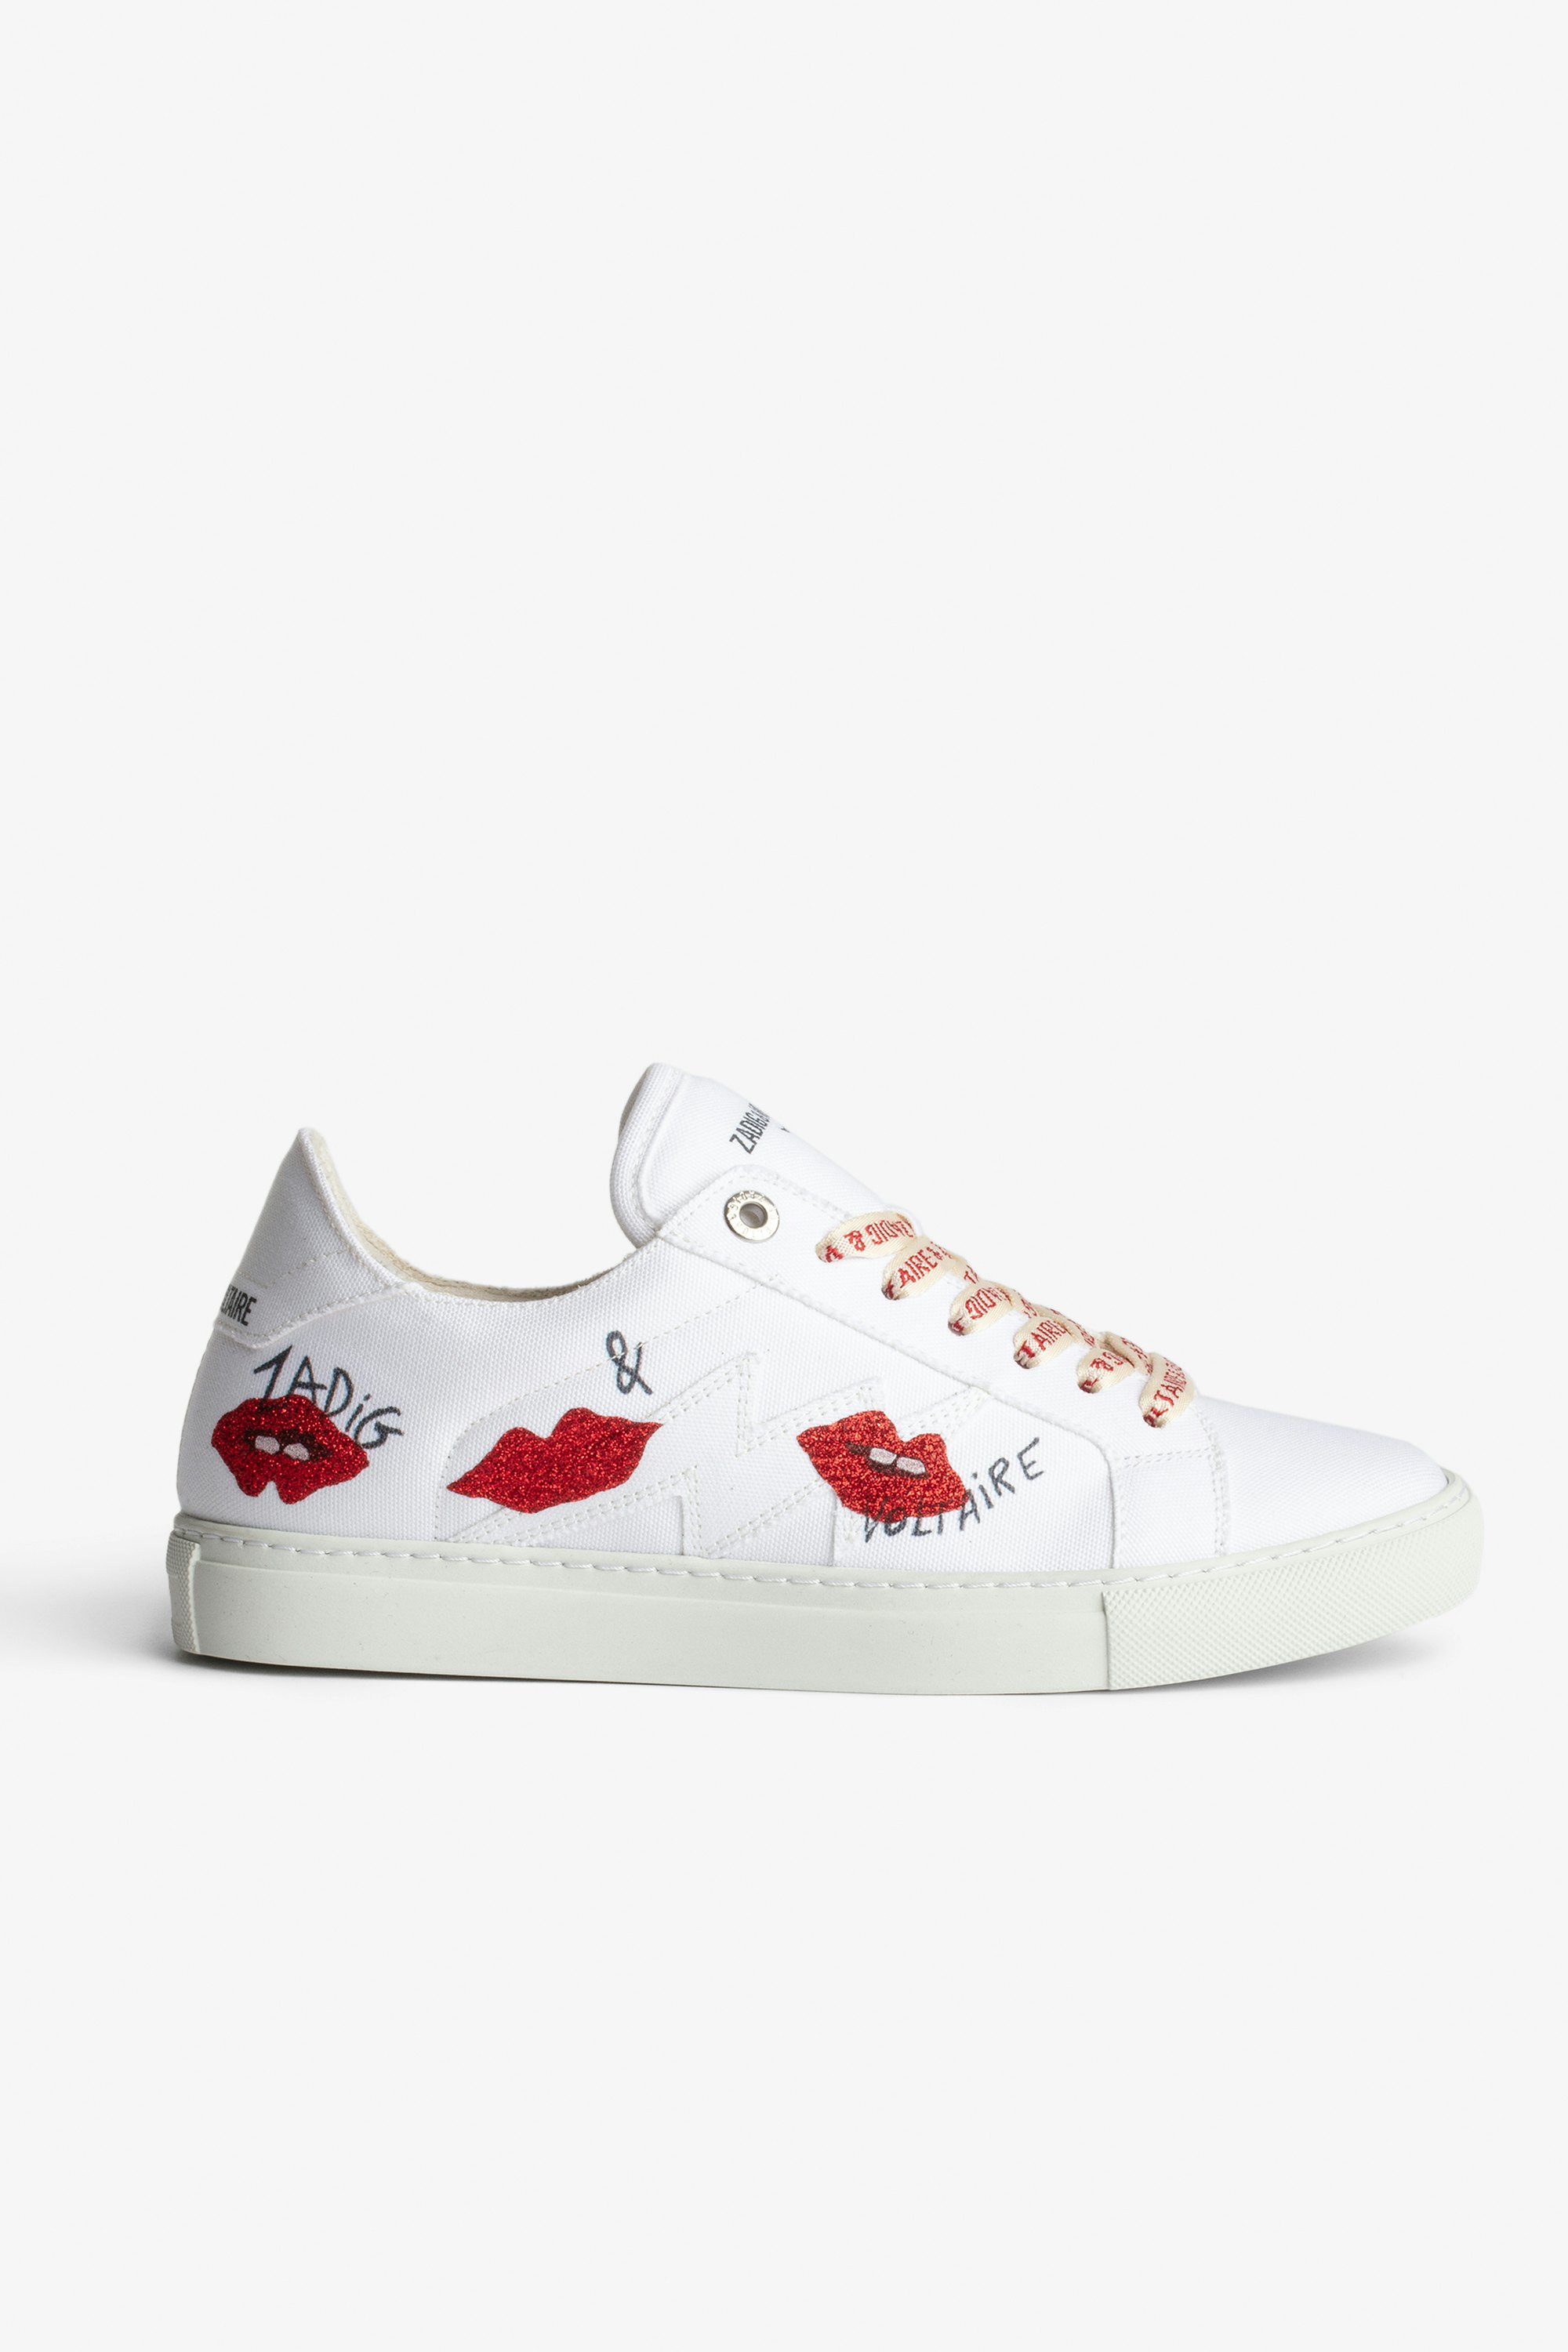 La Flash Trainers Women's low-top trainers in white canvas with glittery lips motifs